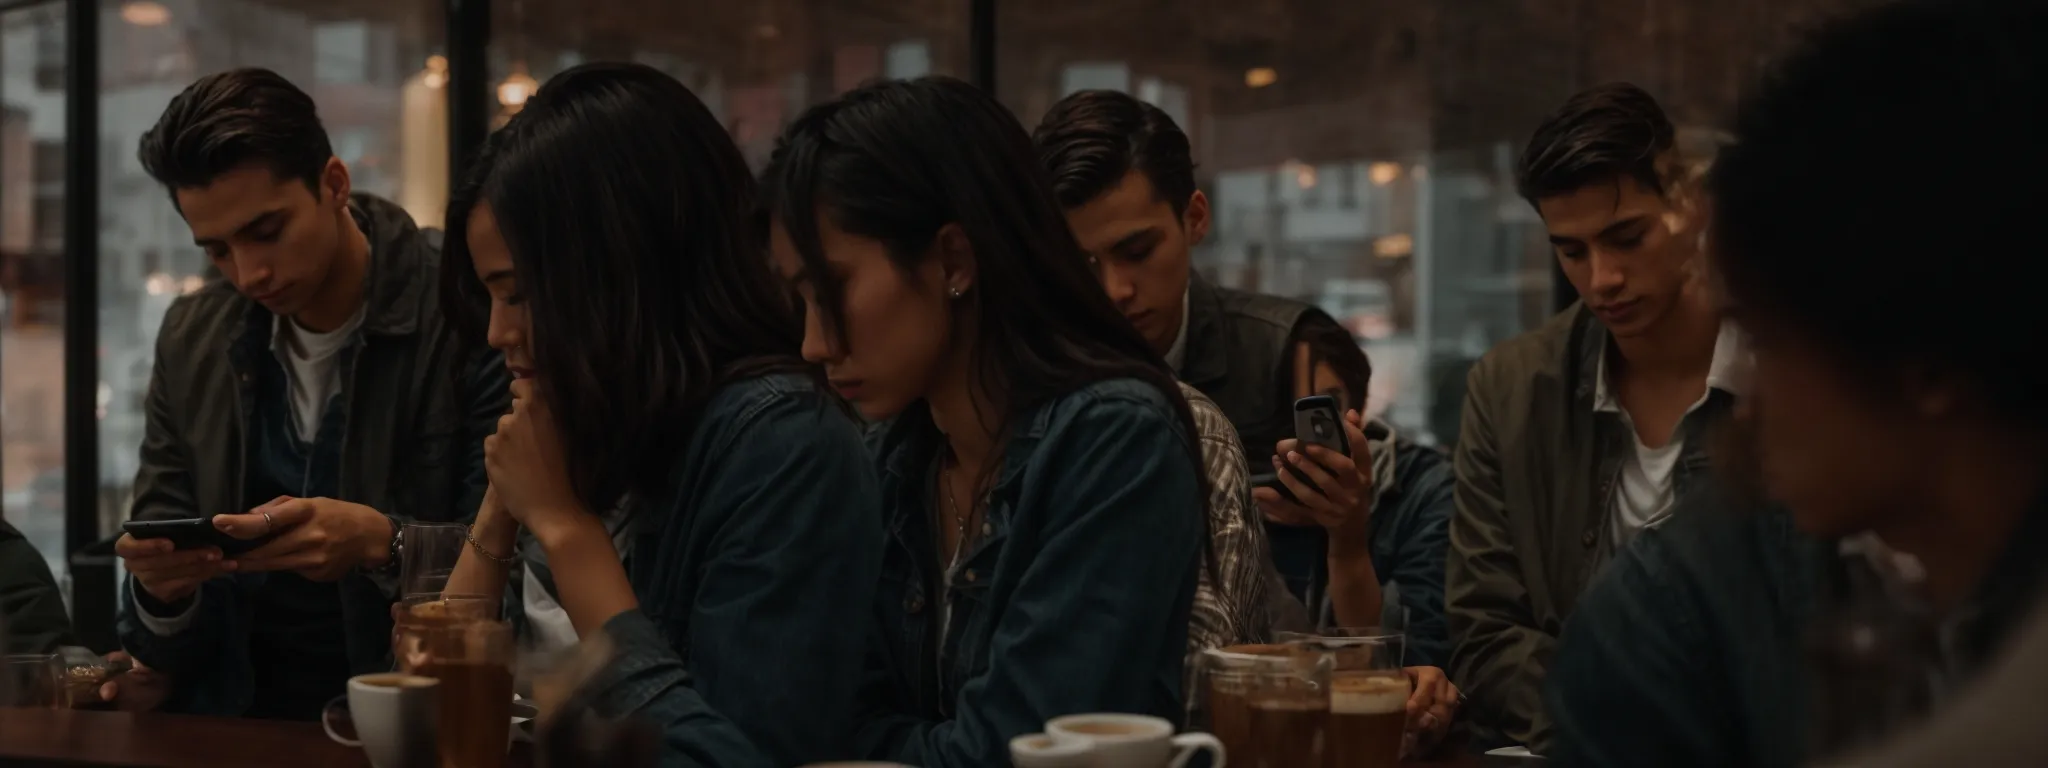 a group of people in a café engrossed in their smartphones and tablets.